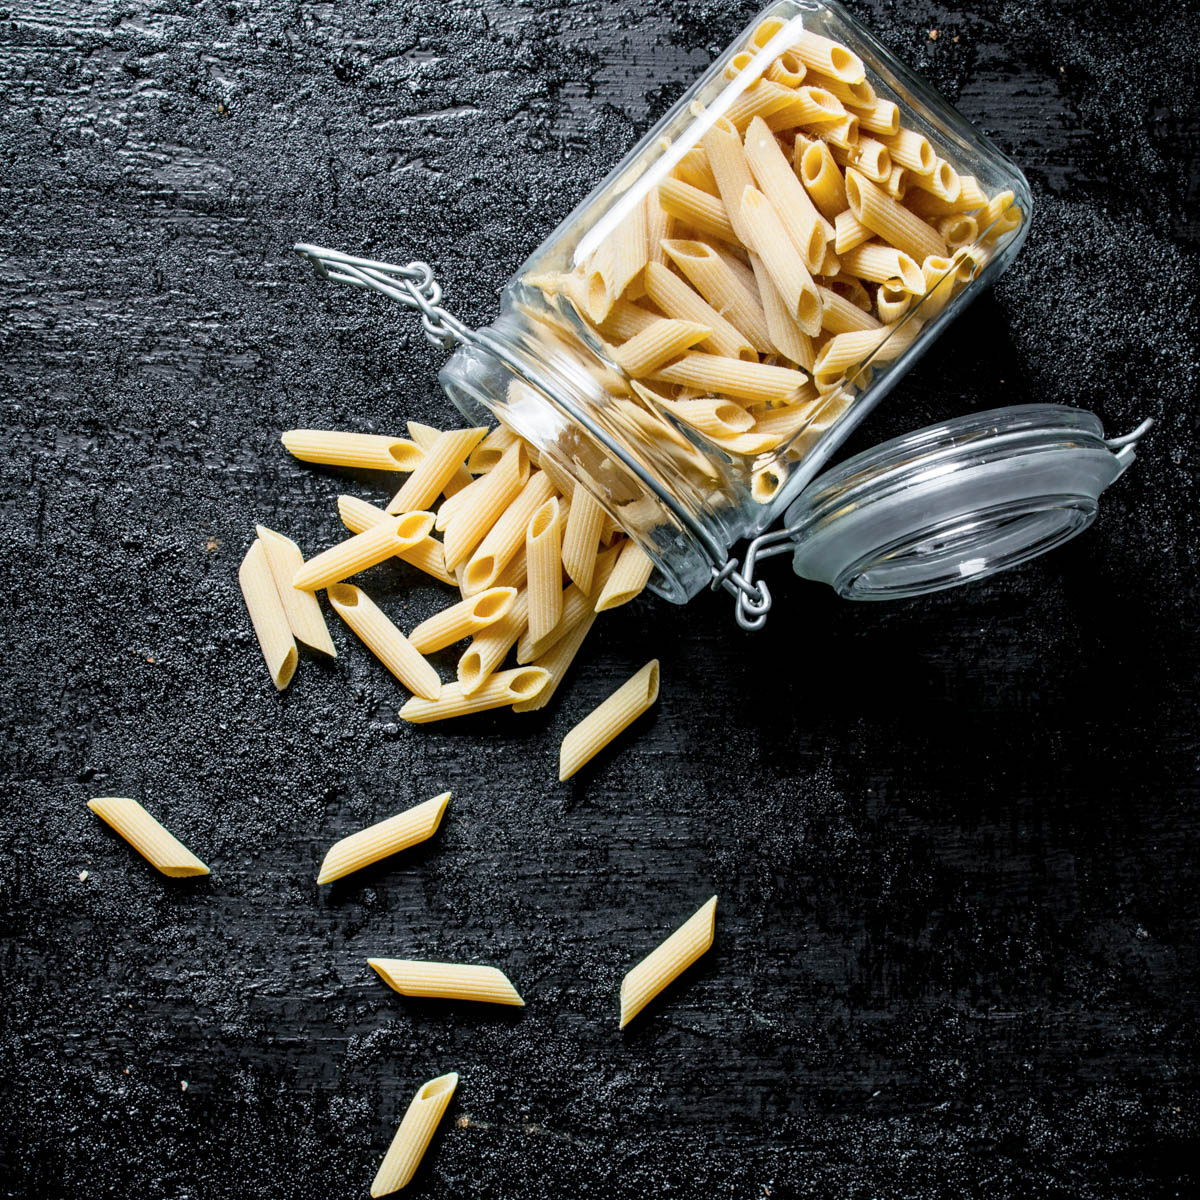 Glass jar with dried pasta spilling out onto a black counter.